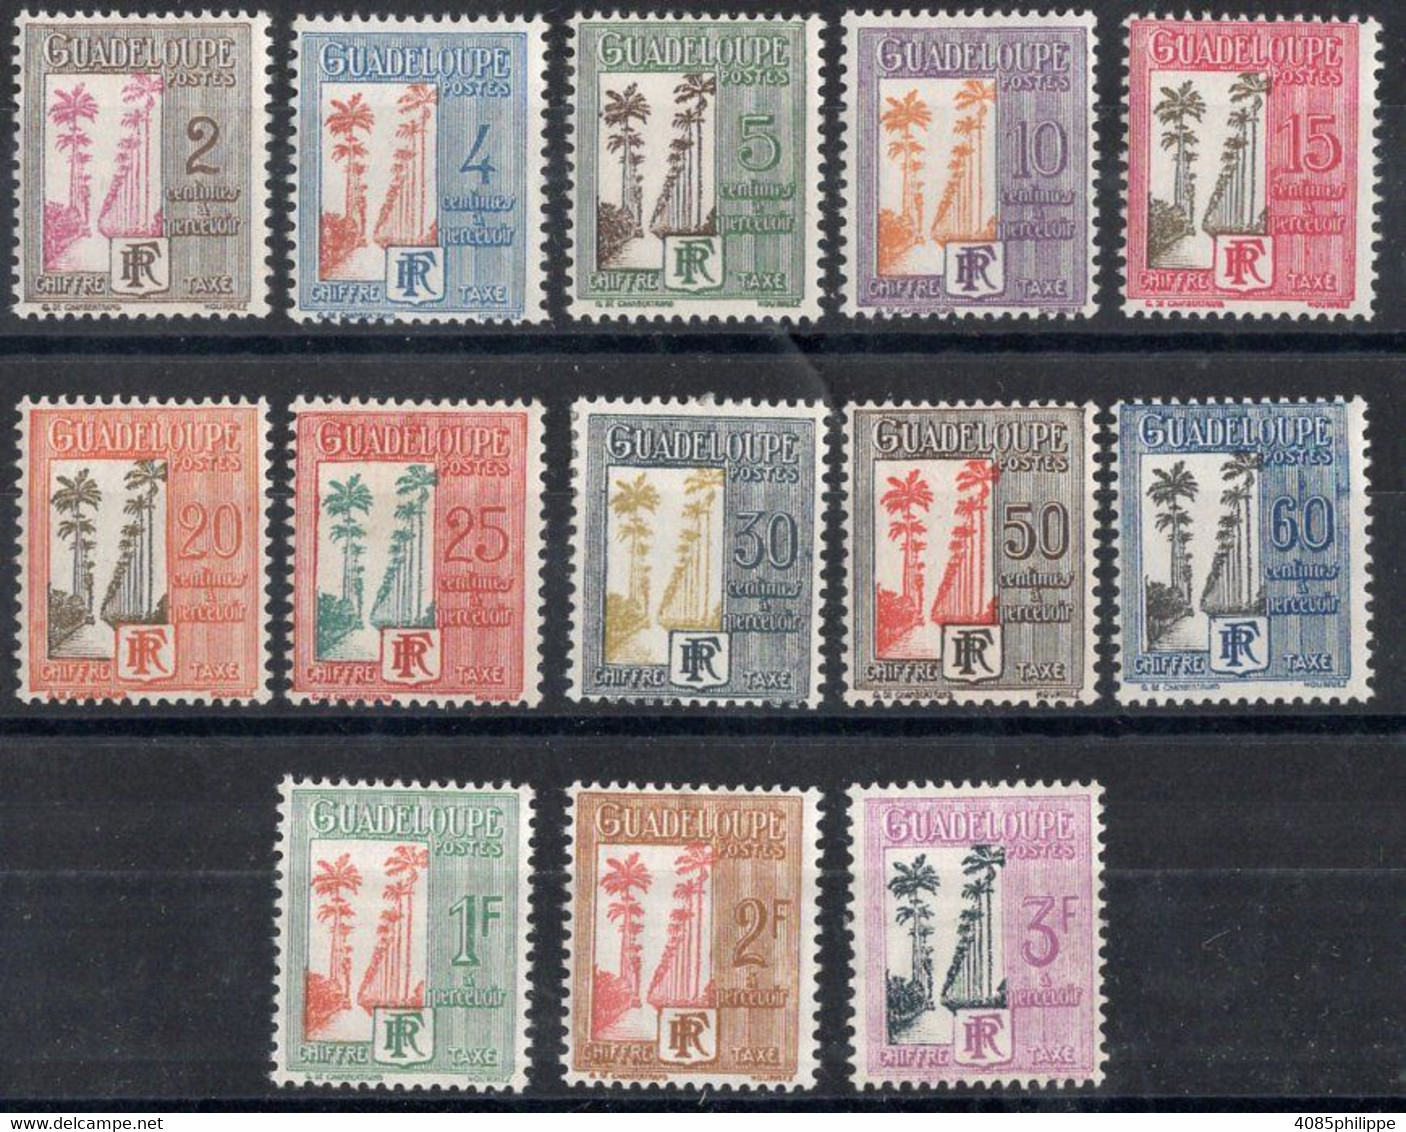 Guadeloupe Timbres-Taxe N°25* à 36* & 37(*)  Neufs Charnières TB Cote 15€00 - Impuestos